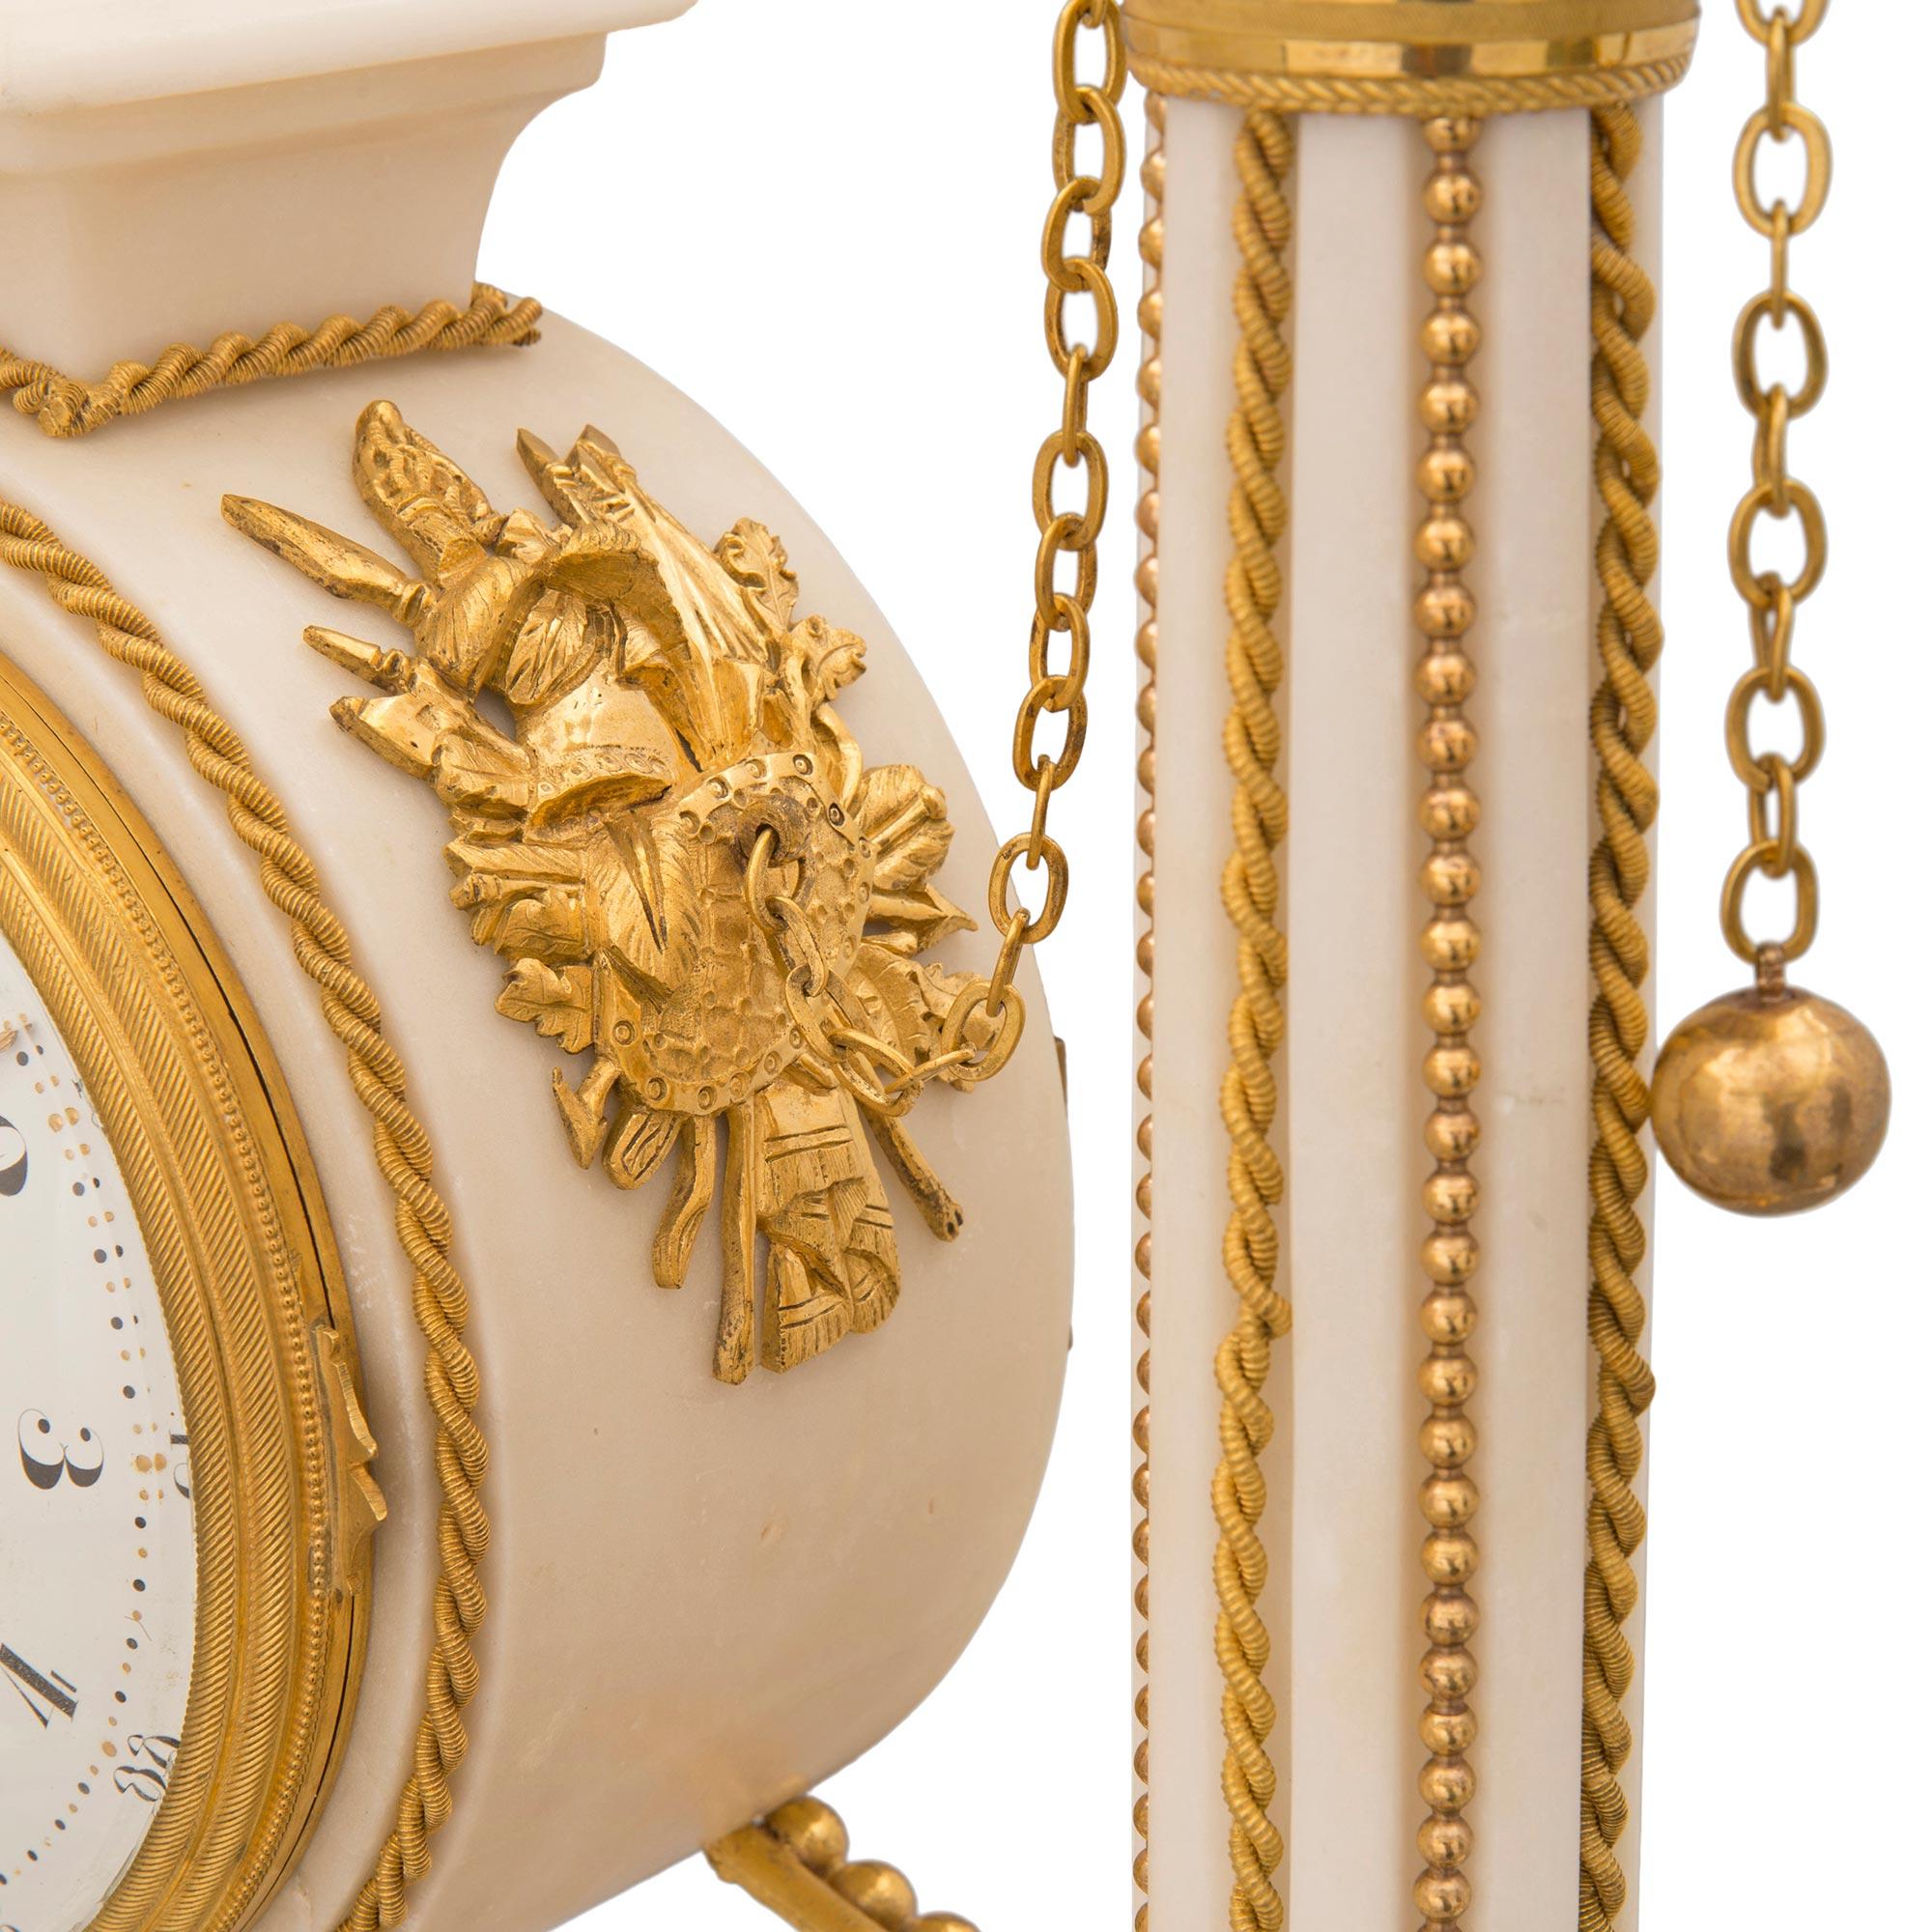 French 19th Century Louis XVI St. Marble and Ormolu Clock, Signed Simona a Paris For Sale 6